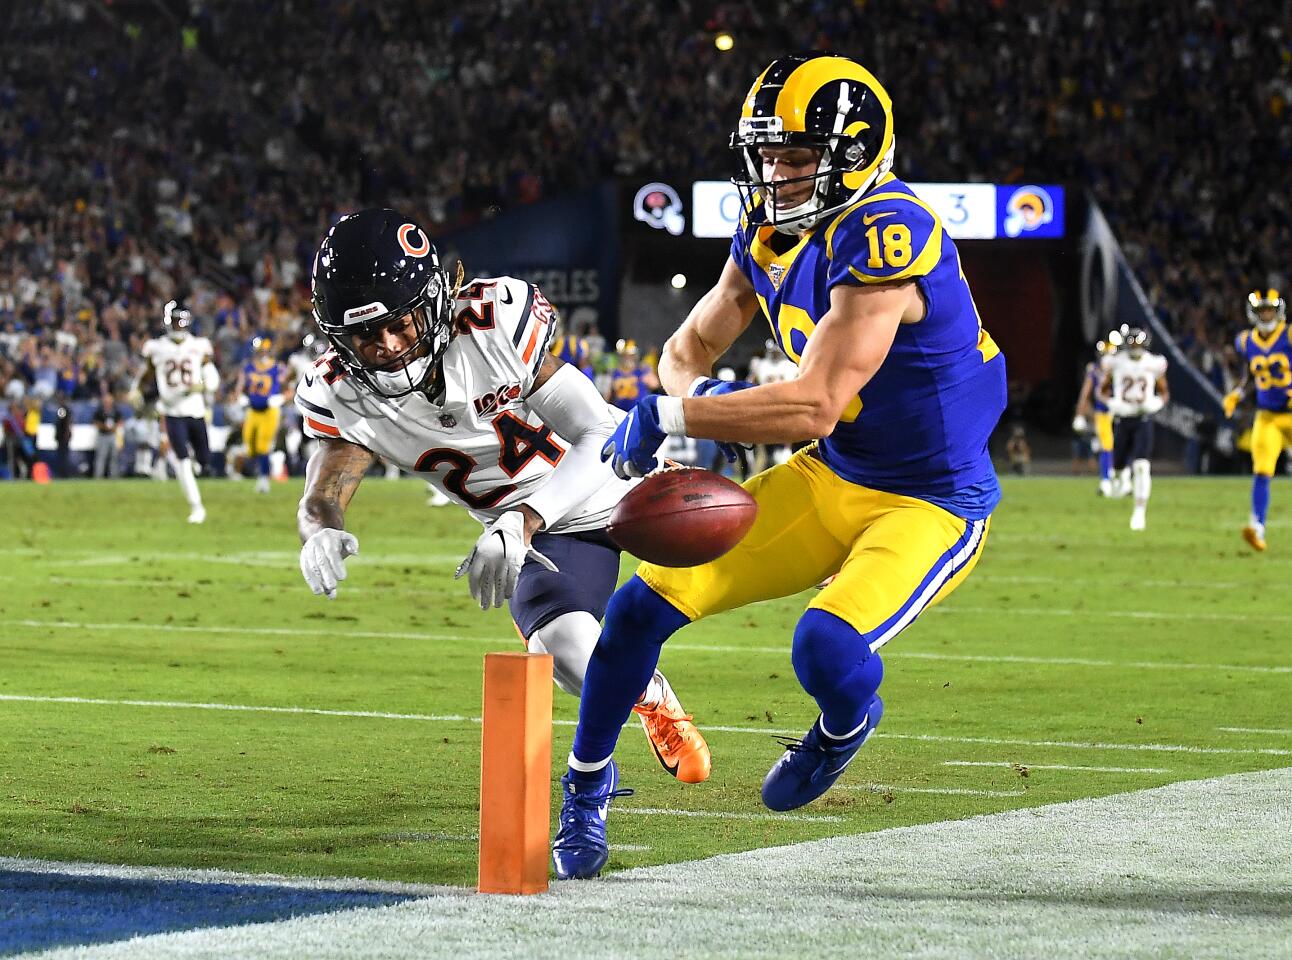 Rams receiver Cooper Kupp fumbles the ball out of bounds at the one-yard line after making a big catch in front of Bears defensive back Buster Skrine.